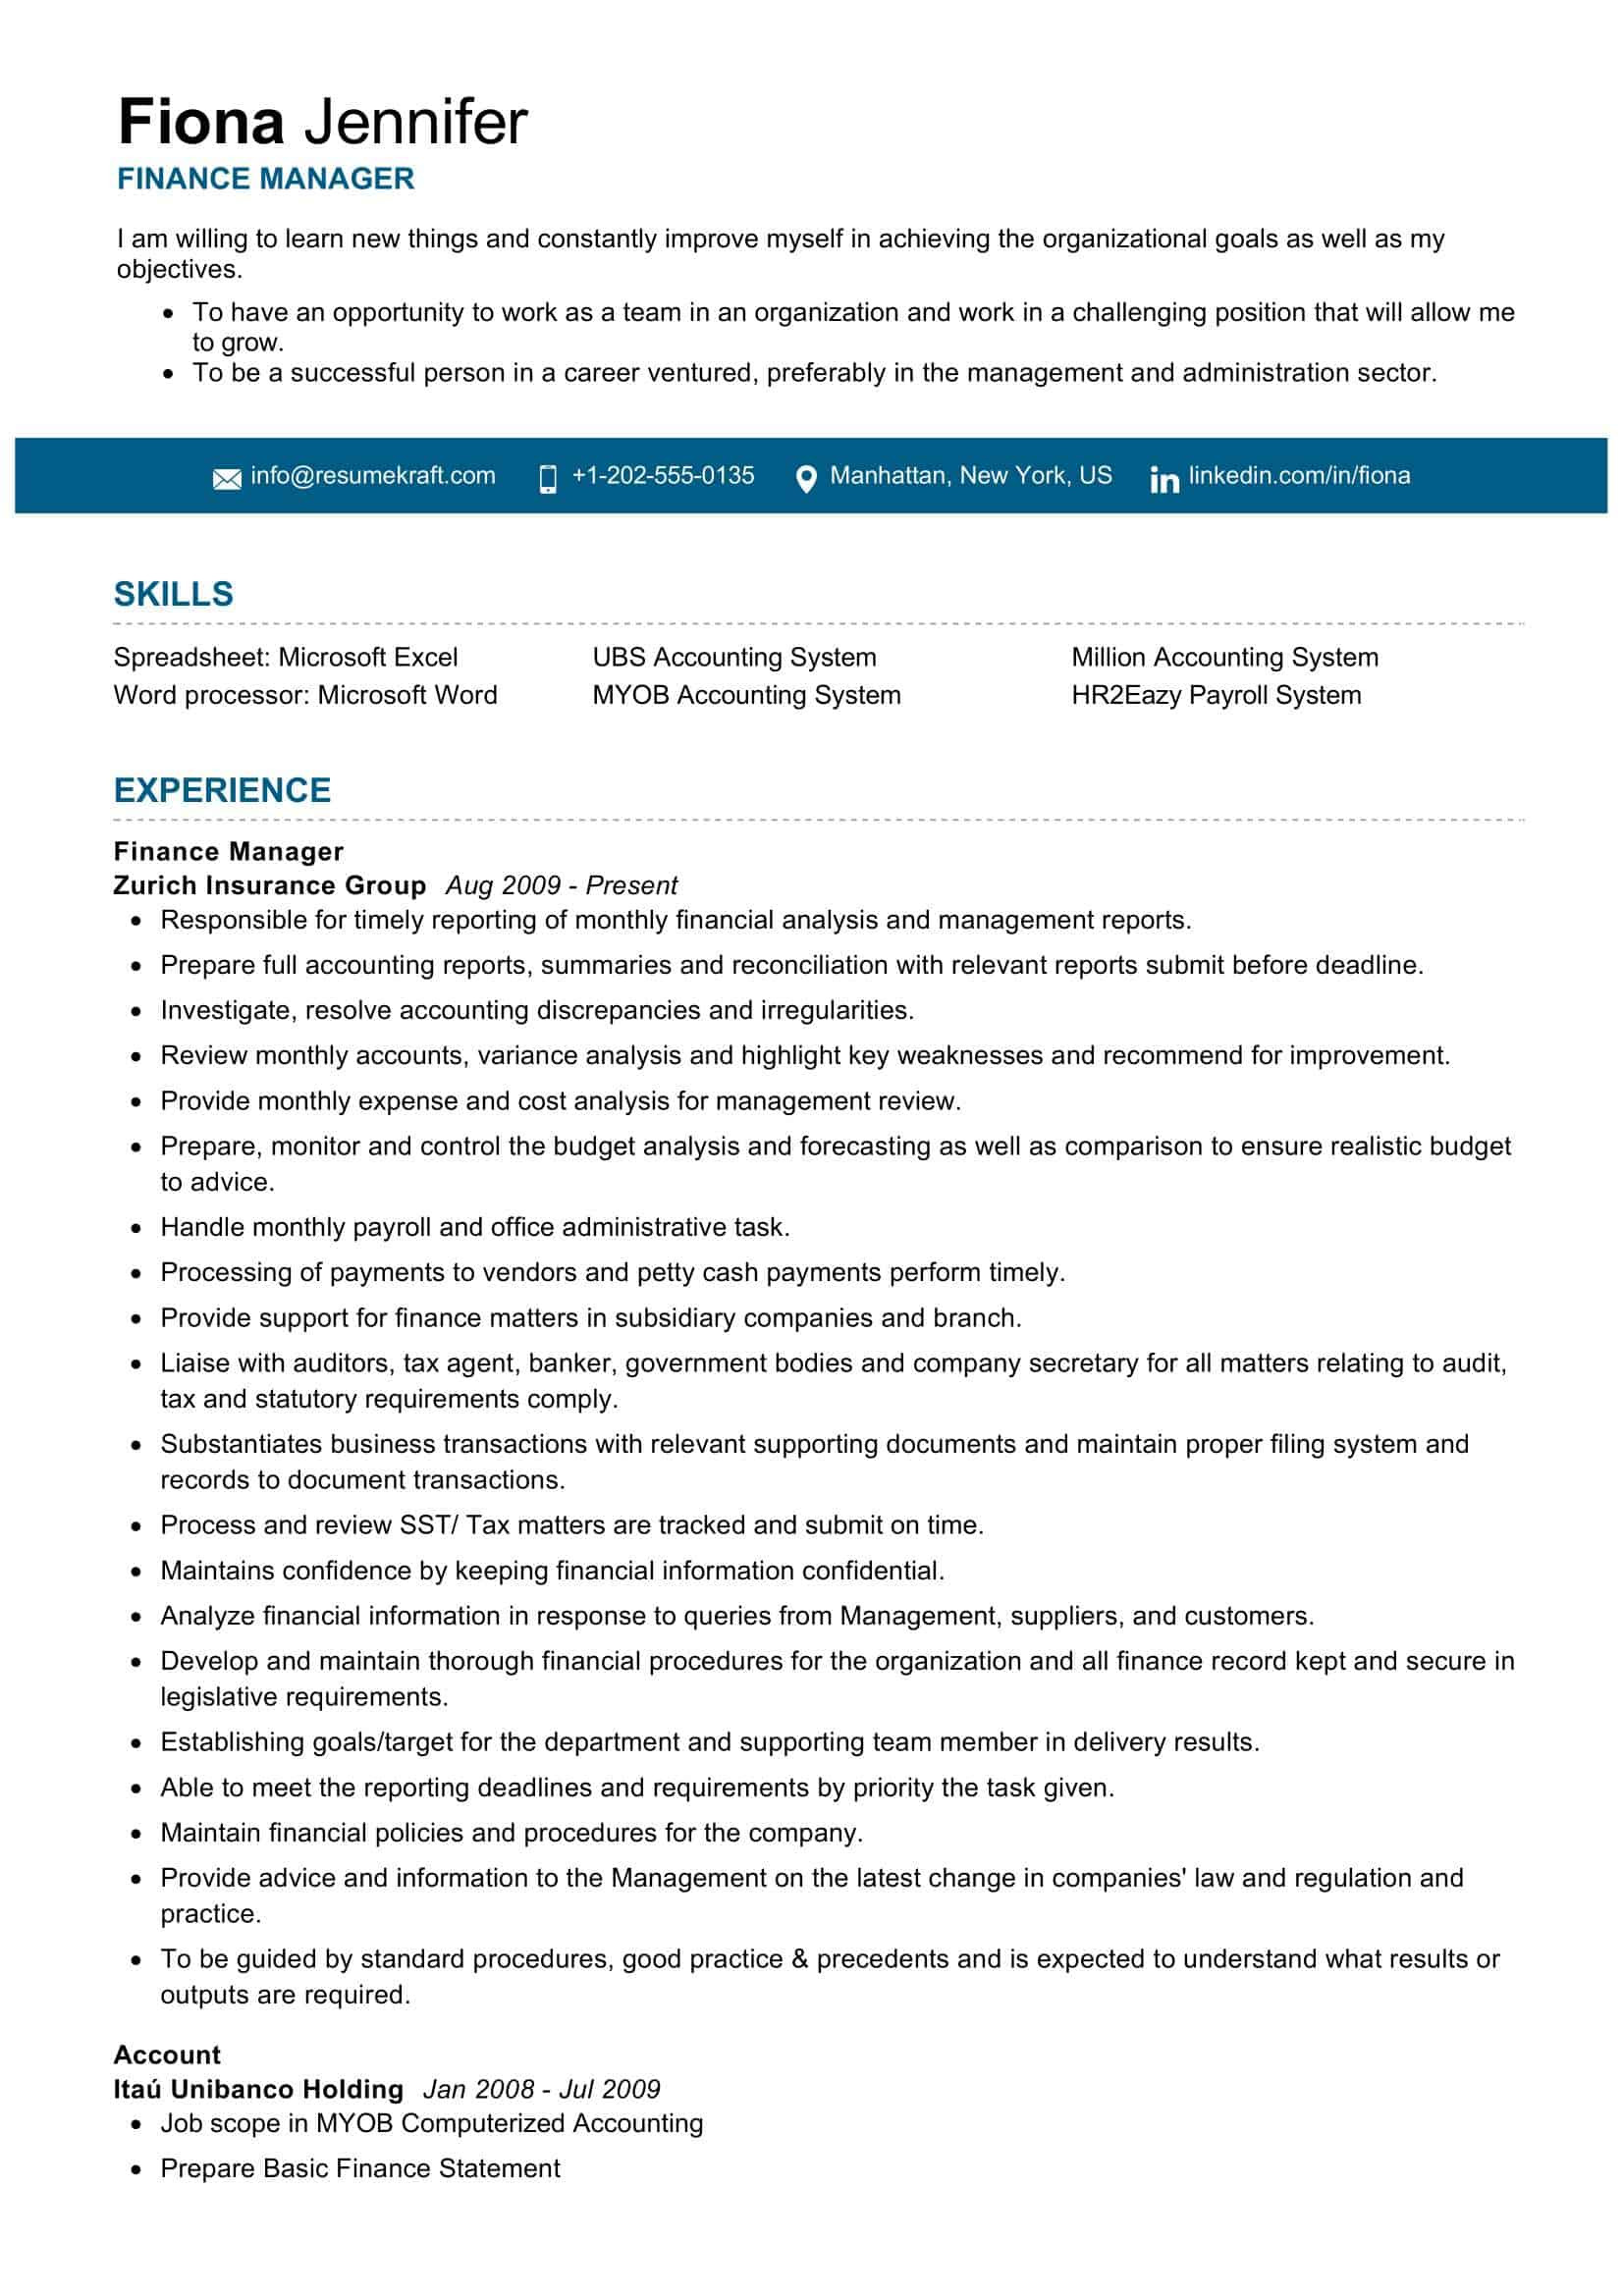 Resume Sample From A Finance Person Finance Manager Resume Sample 2022 Writing Tips – Resumekraft